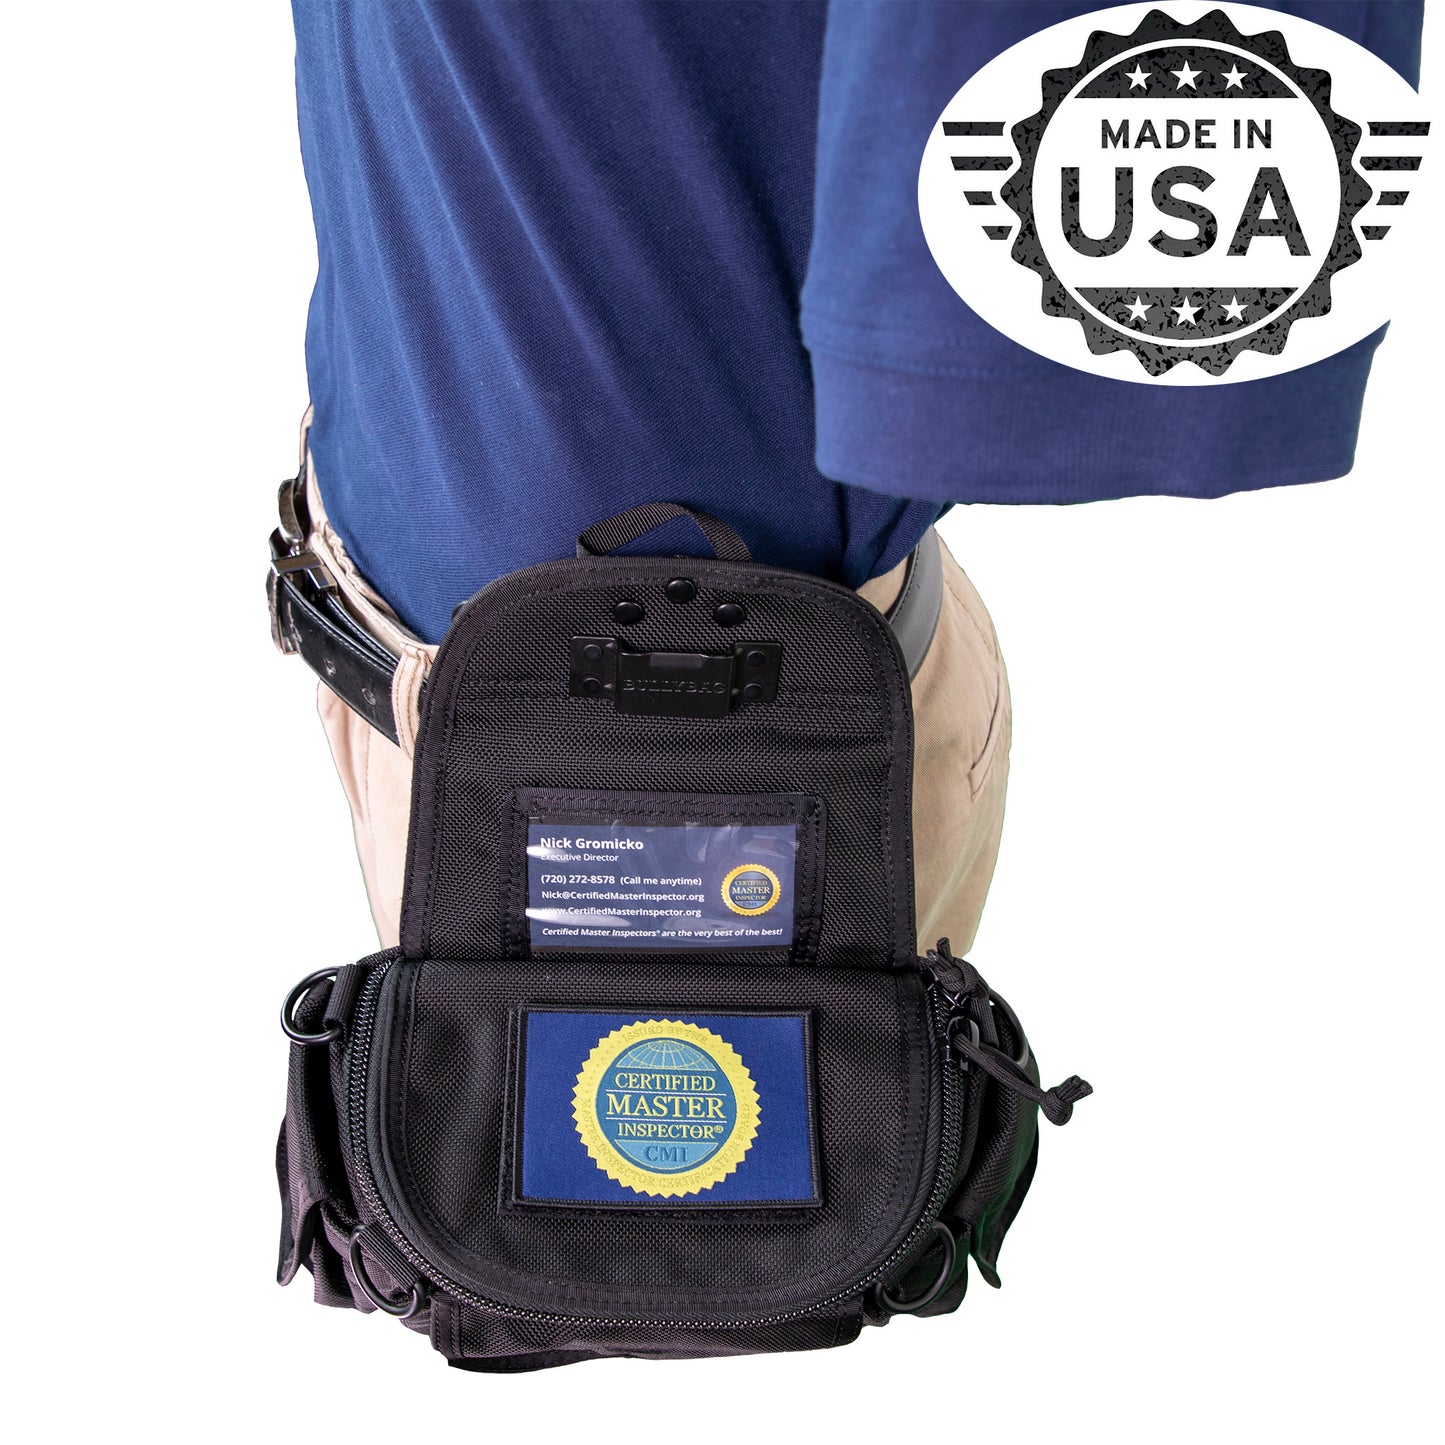 Certified Master Inspector® Tool Pouch